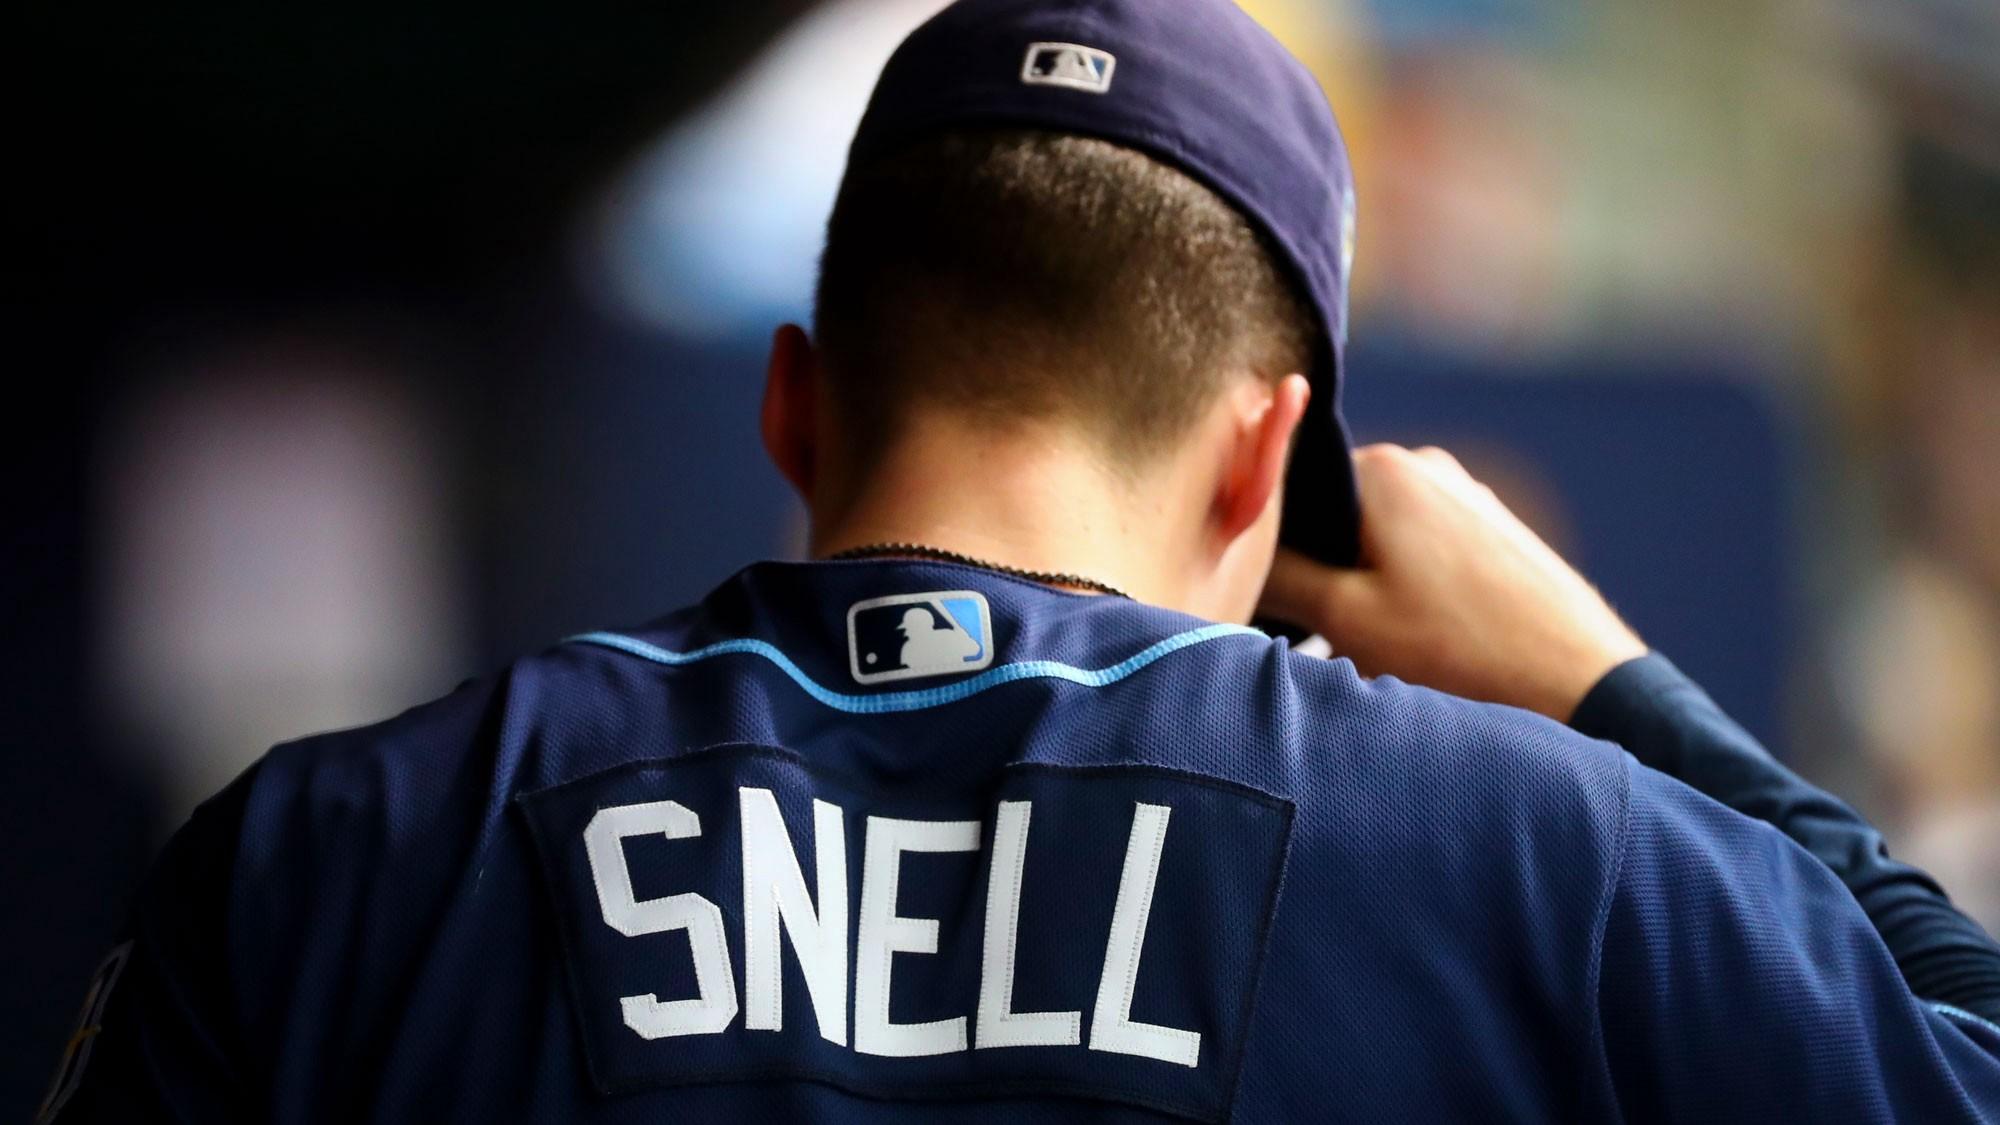 Blake Snell donates jersey from 21st win to the Baseball Hall of Fame